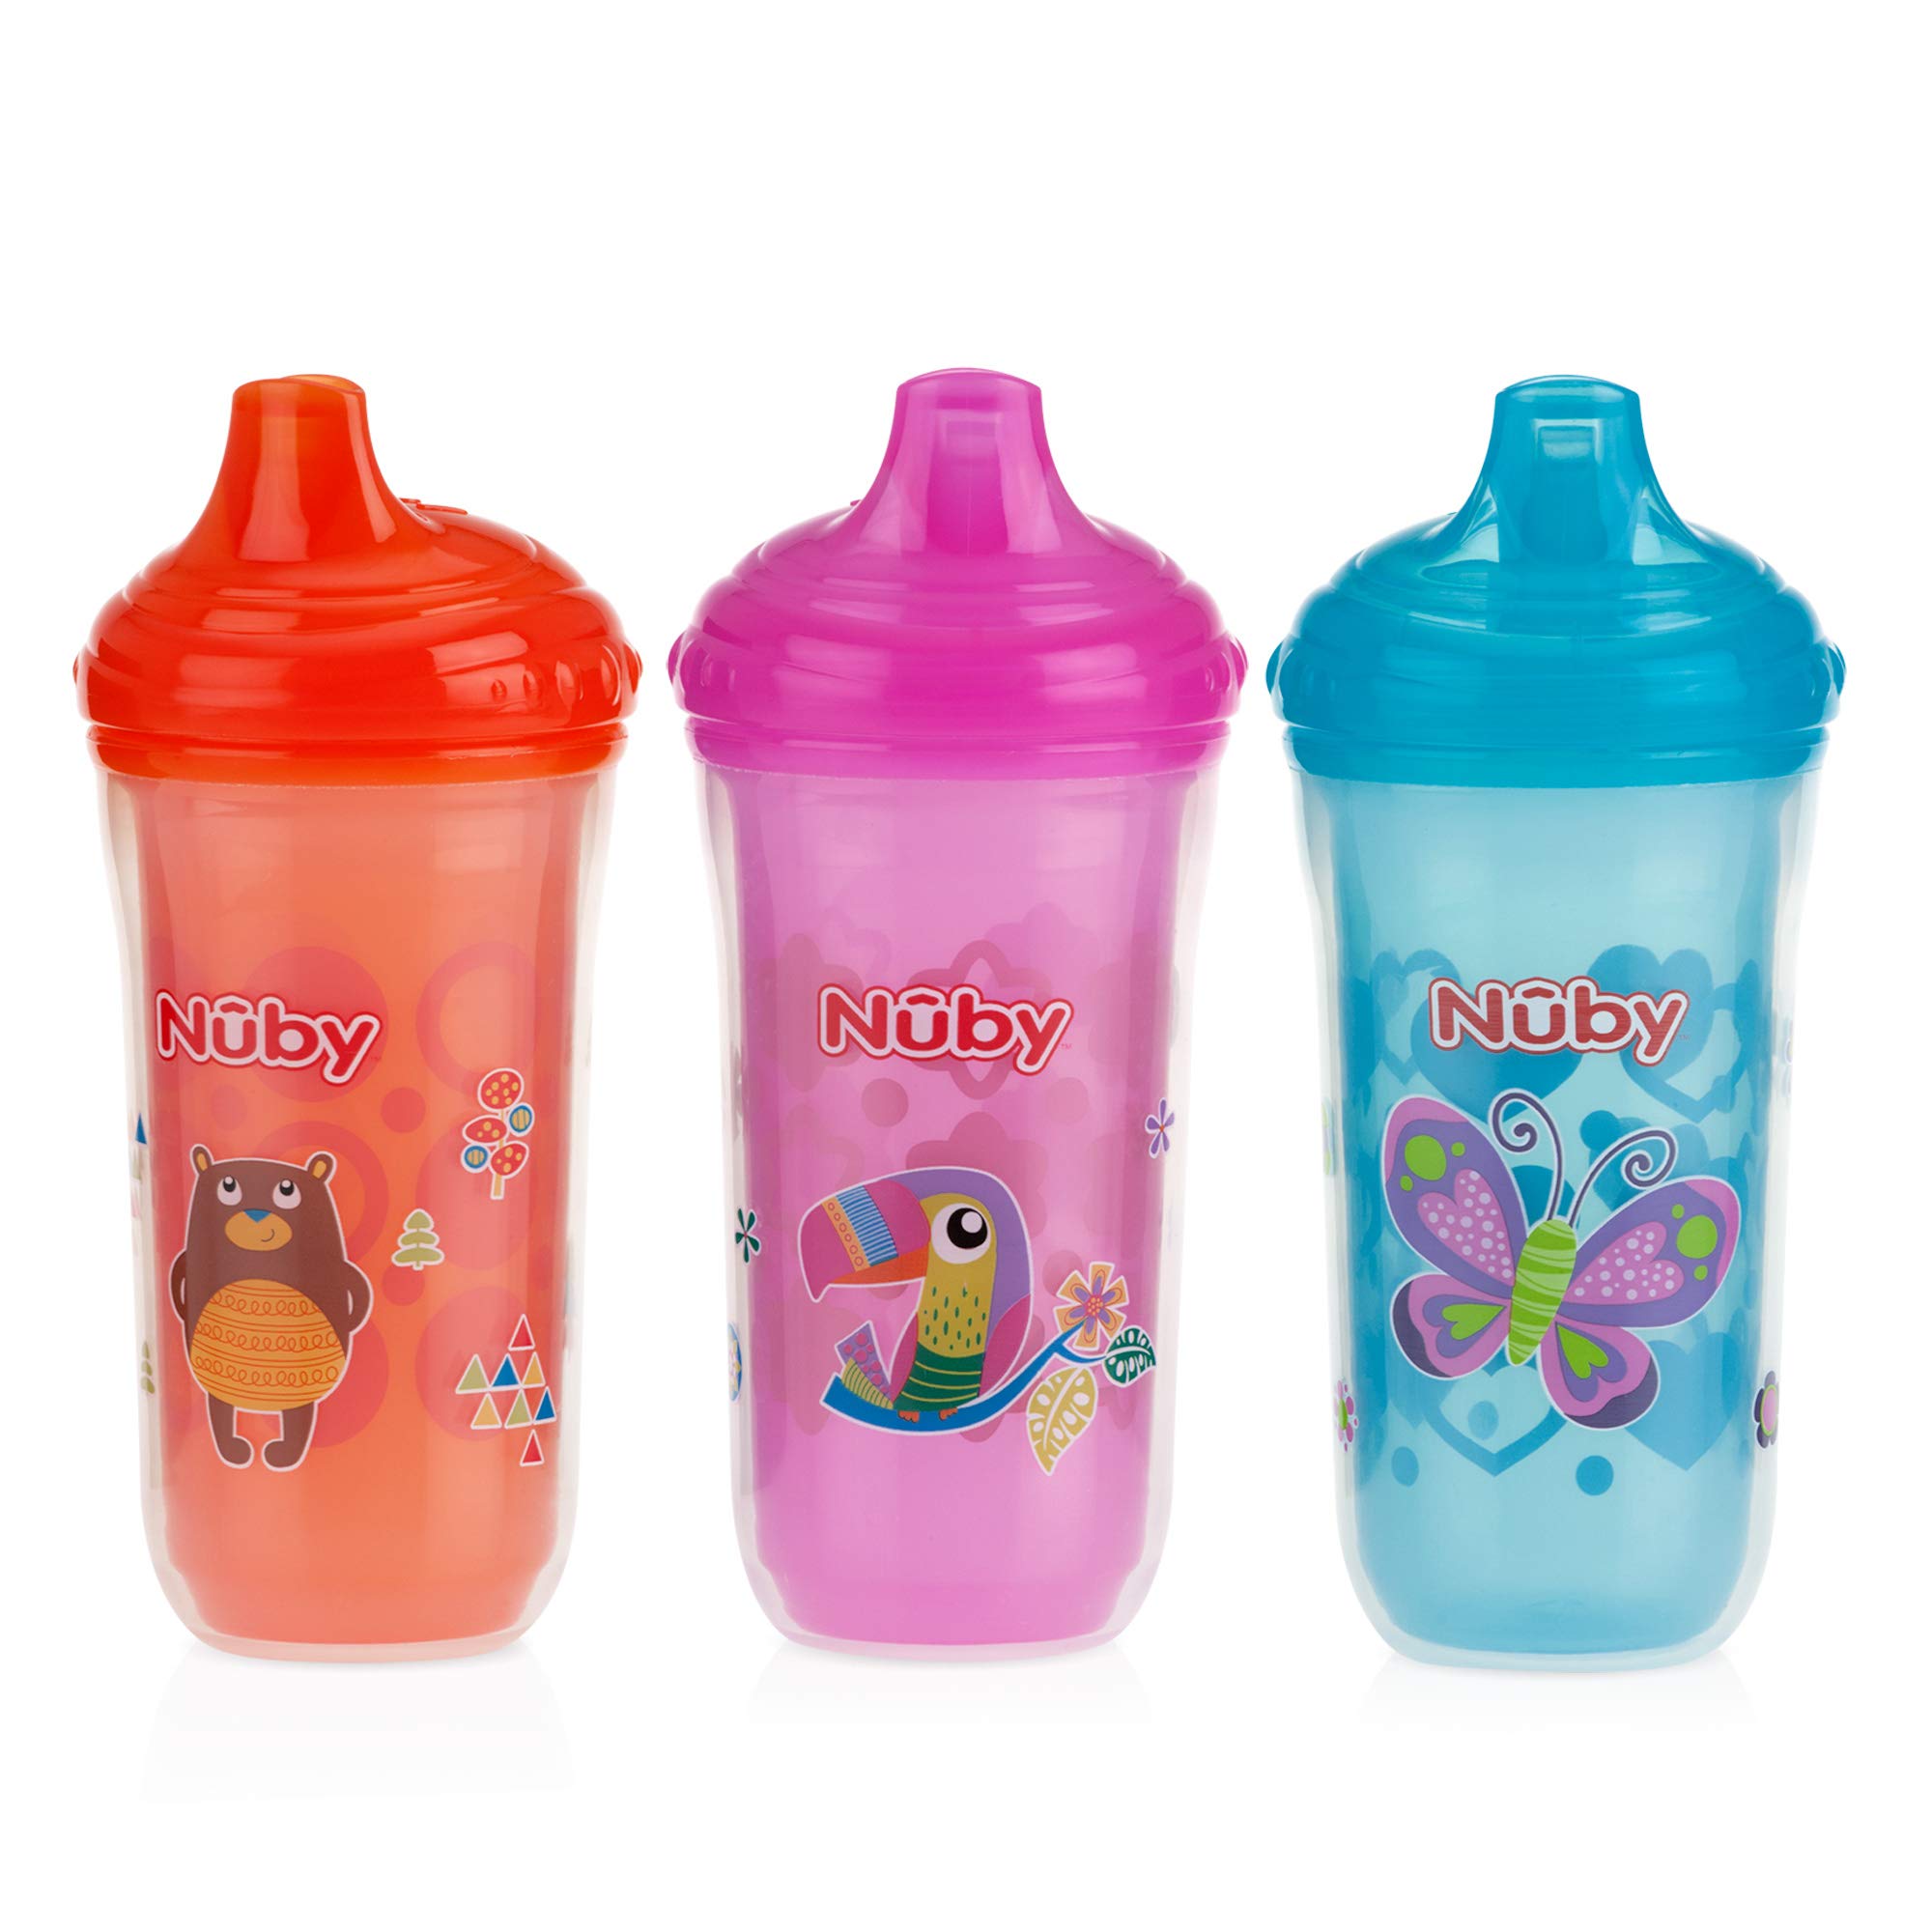 Nuby,Plastic Insulated No Spill Easy Sip Cup With Vari-Flo Valve Hard Spout, Girl, 3 Count,9 Ounce